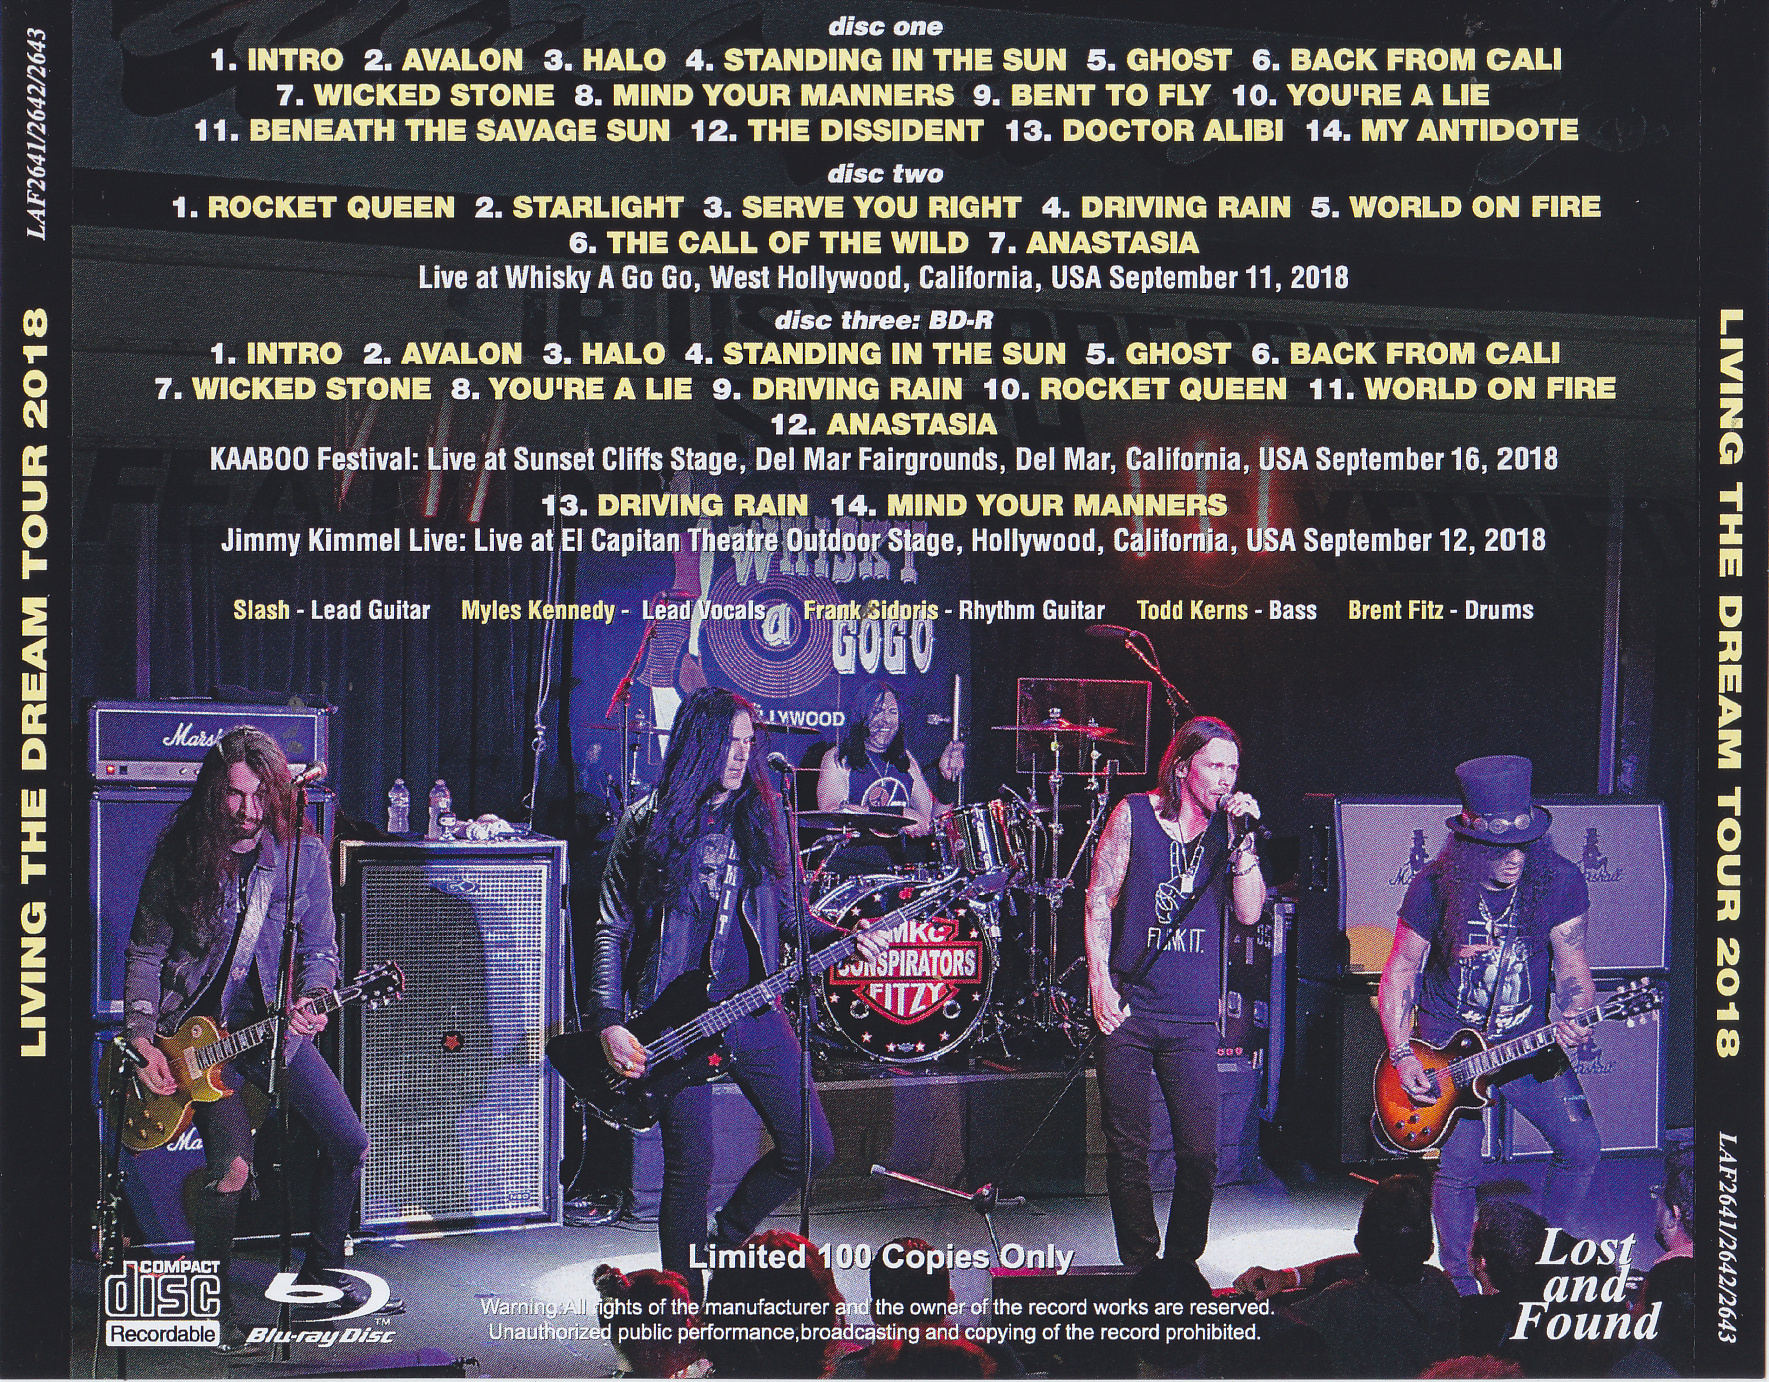 Slash featuring Myles Kennedy & The Conspirators - Living The Dream Tour [2  CD/BluRay] -  Music